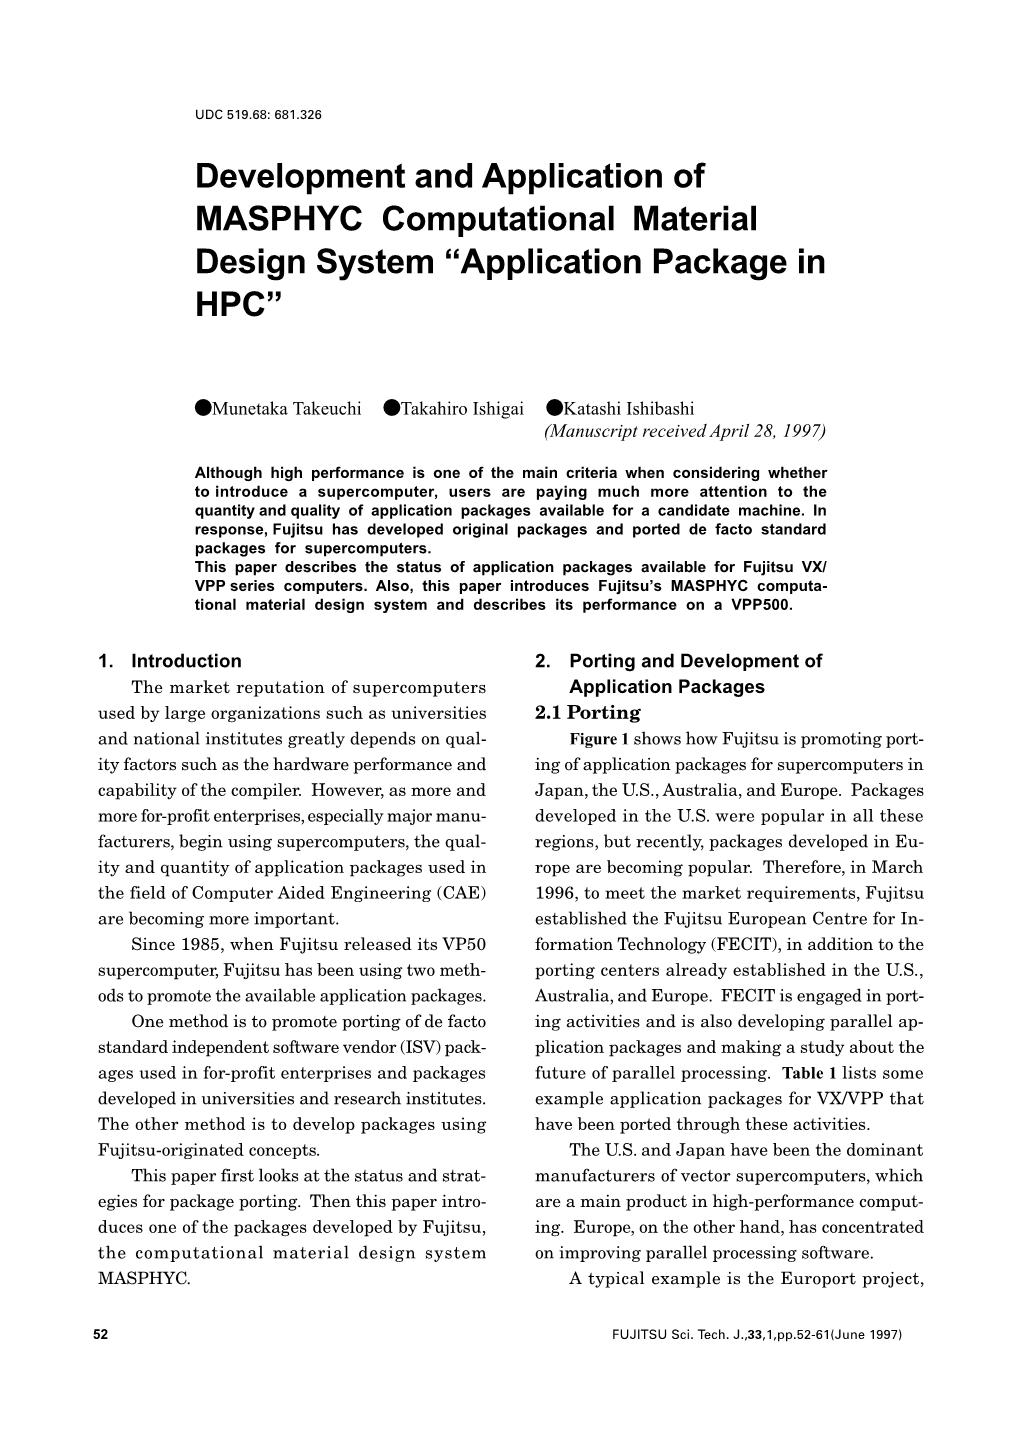 Application Package in HPC”